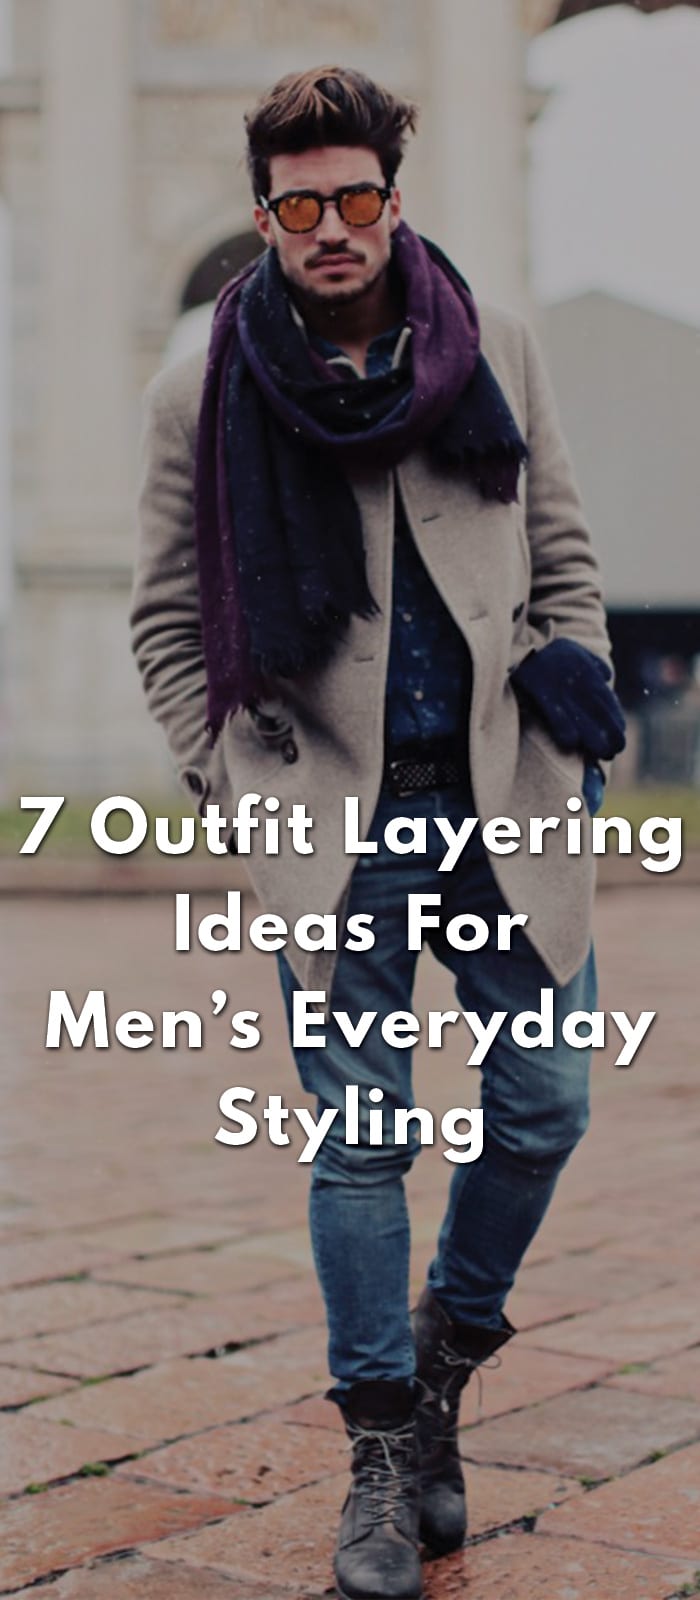 7-Outfit-Layering-Ideas-For-Men’s-Everyday-Styling